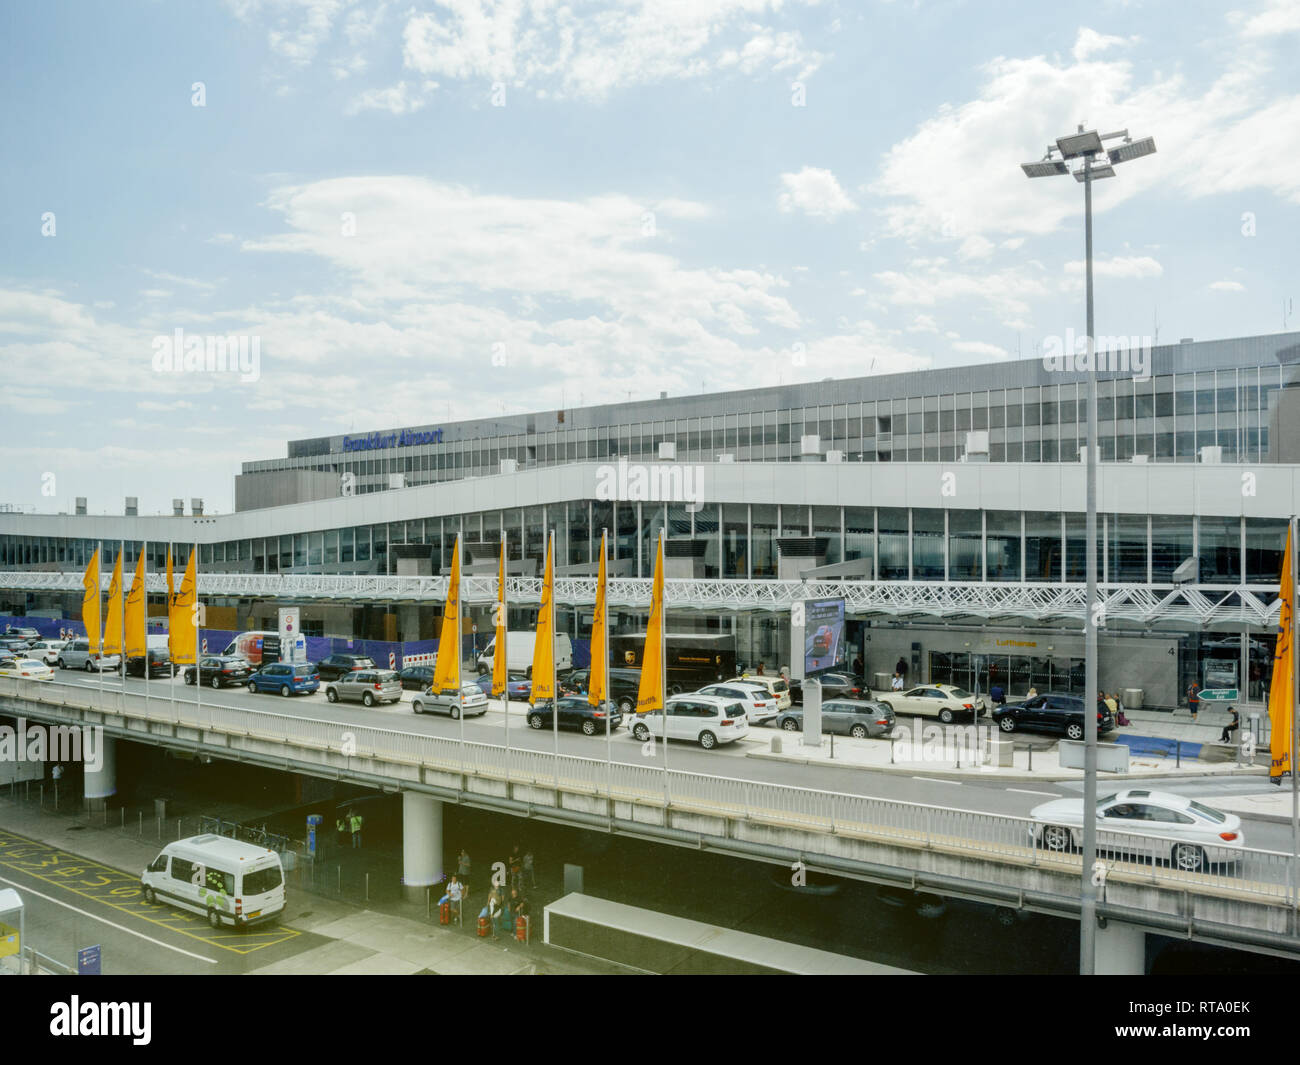 FRANKFURT, GERMANY - AUG 1, 2017: Cars dropping off and picking up passengers at Frankfurt airport departures and arrivals seen from the Squaire office building Lufthansa Stock Photo